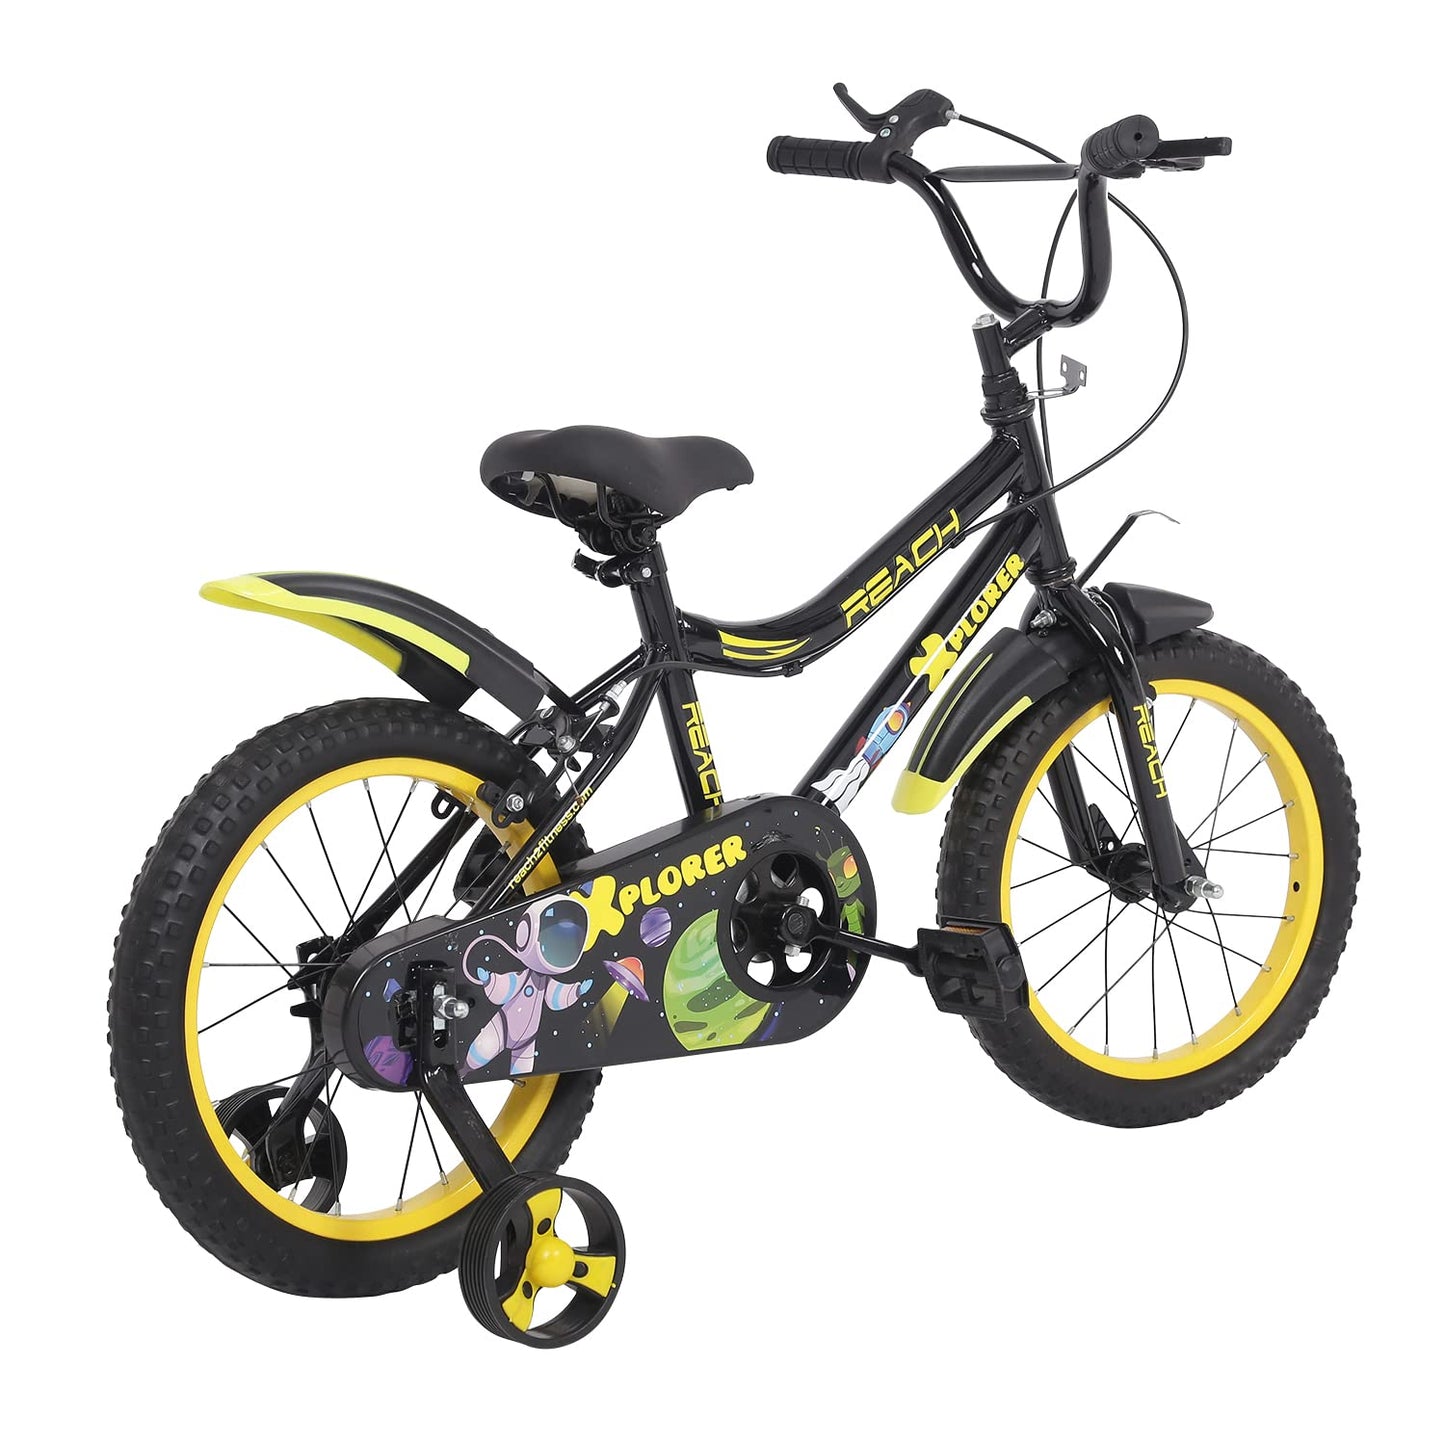 Reach Xplorer Kids Cycle 16T with Training Wheels  for Boys and Girls  90 Assembled  Frame Size 12  Ideal for Height 3 ft 8 inch  Ideal for Ages 4-8 Years